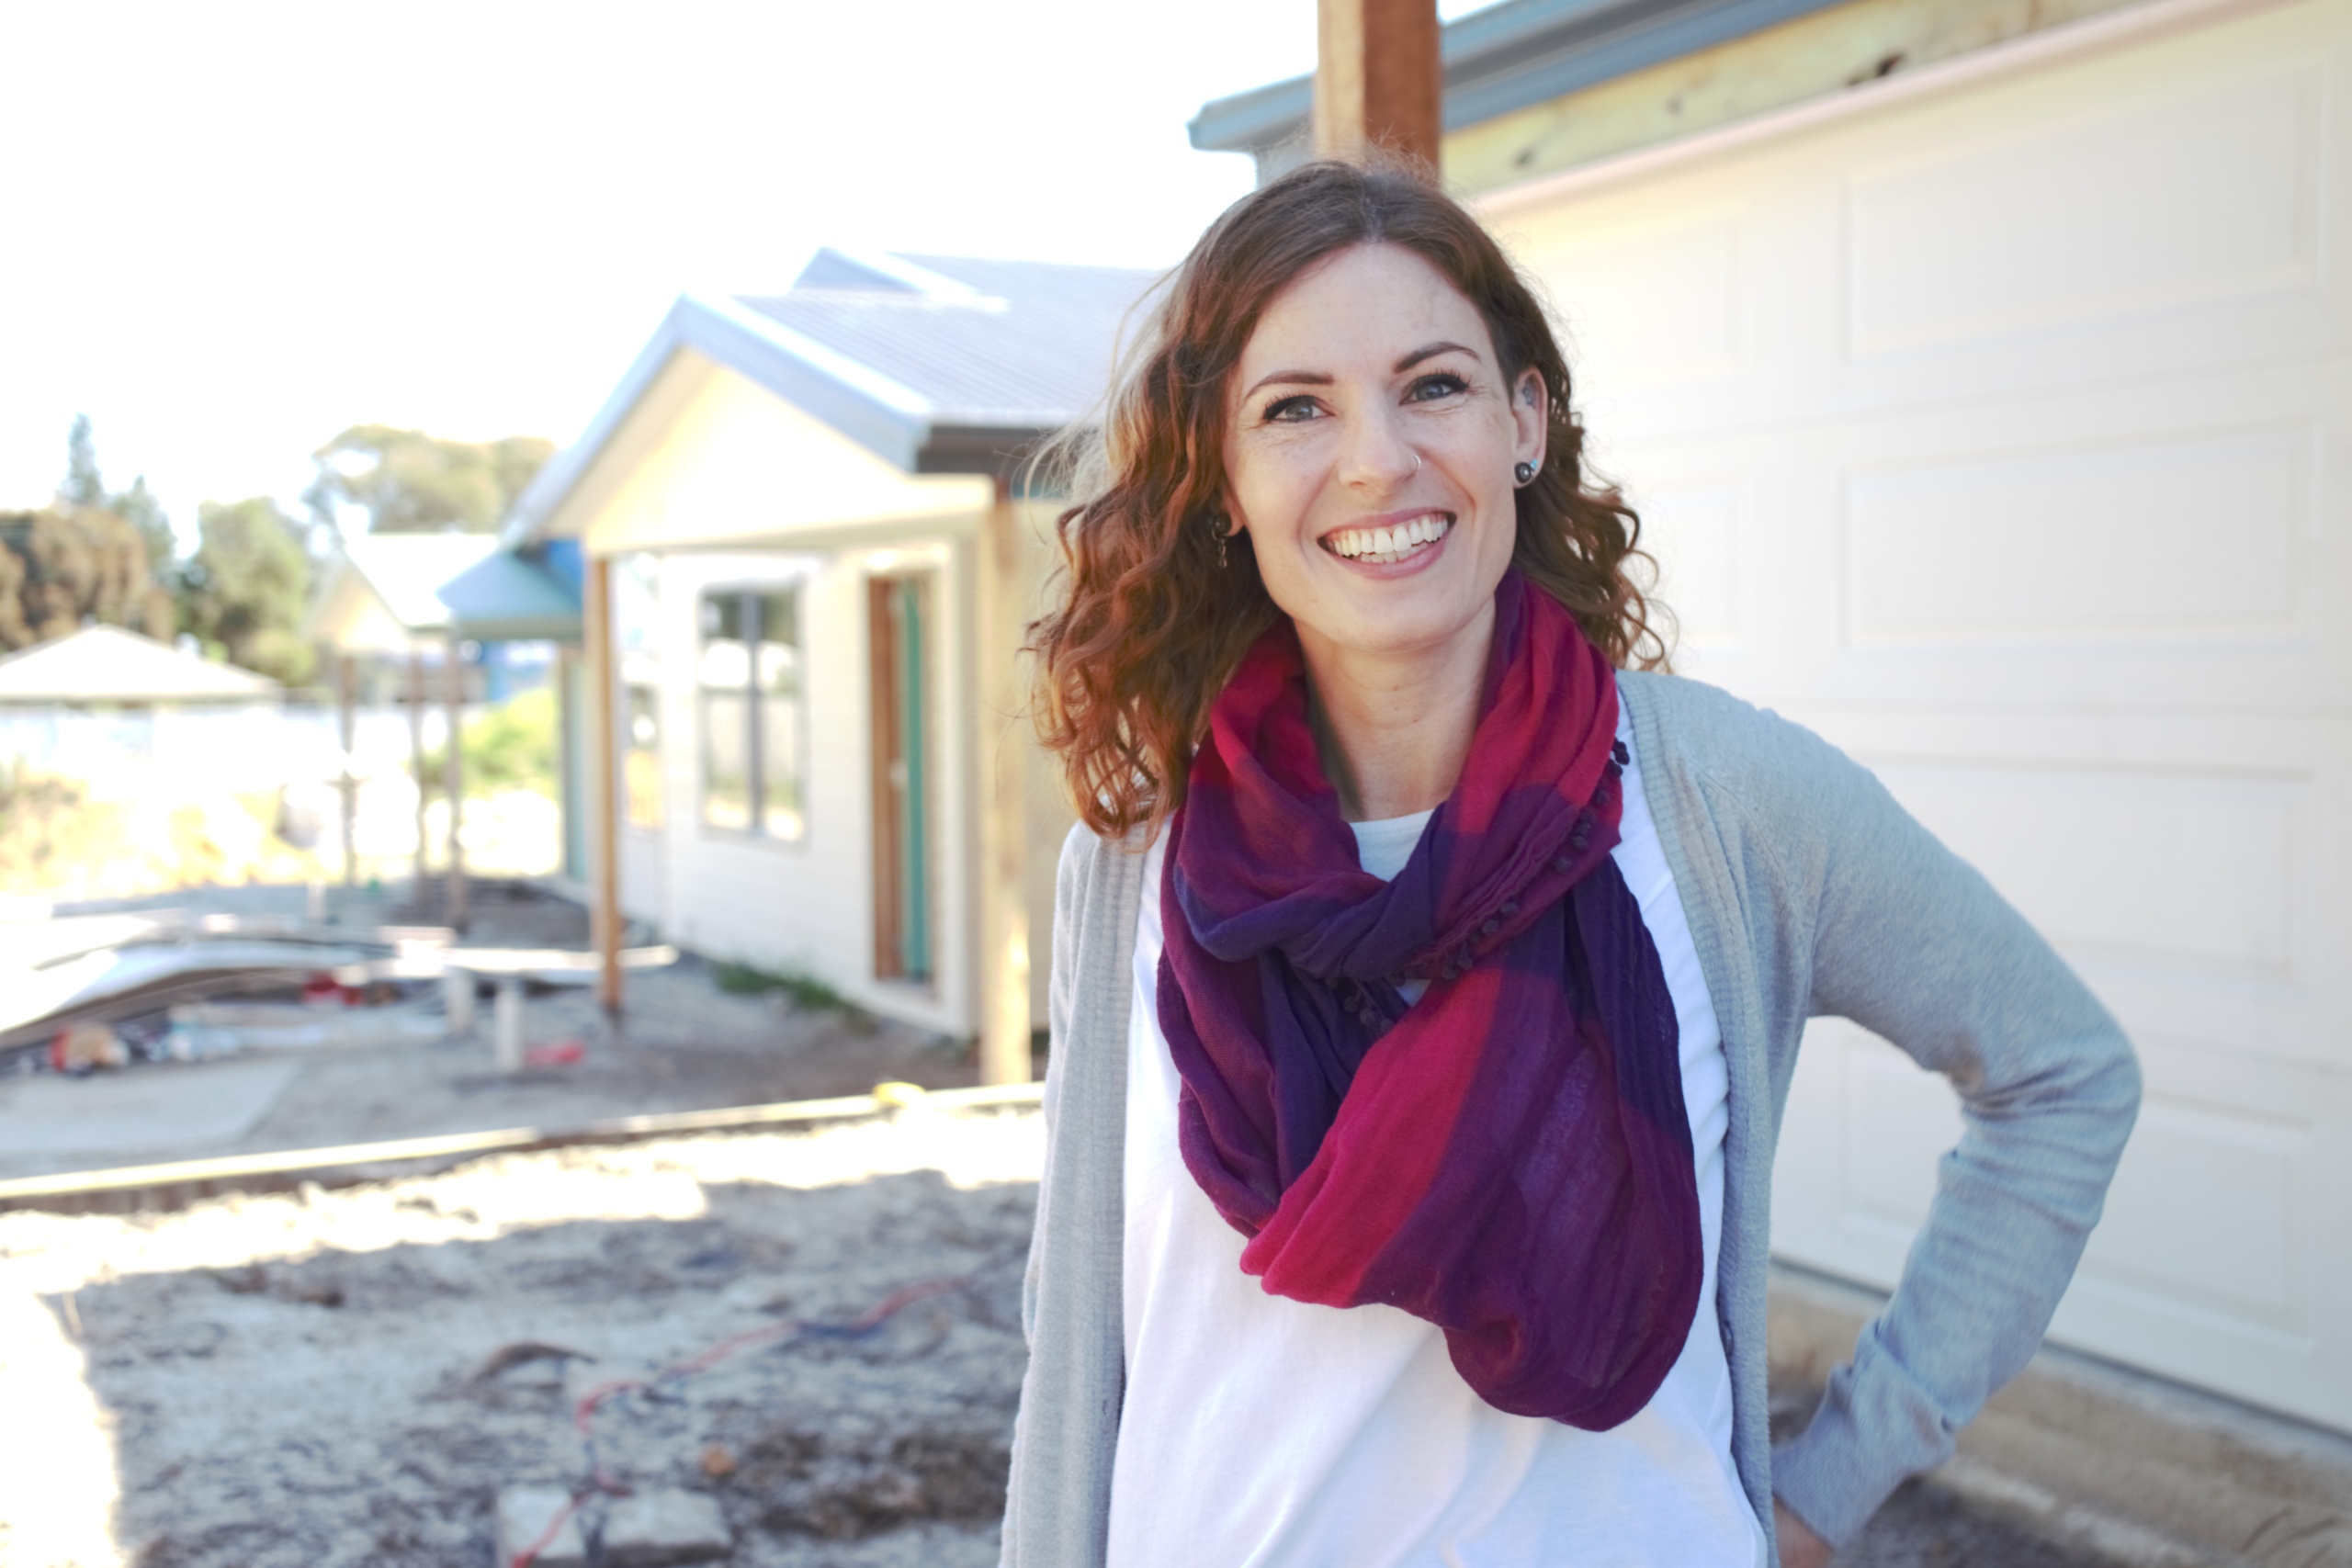 A photo of a woman smiling as she stands in front of a nearly completed house build